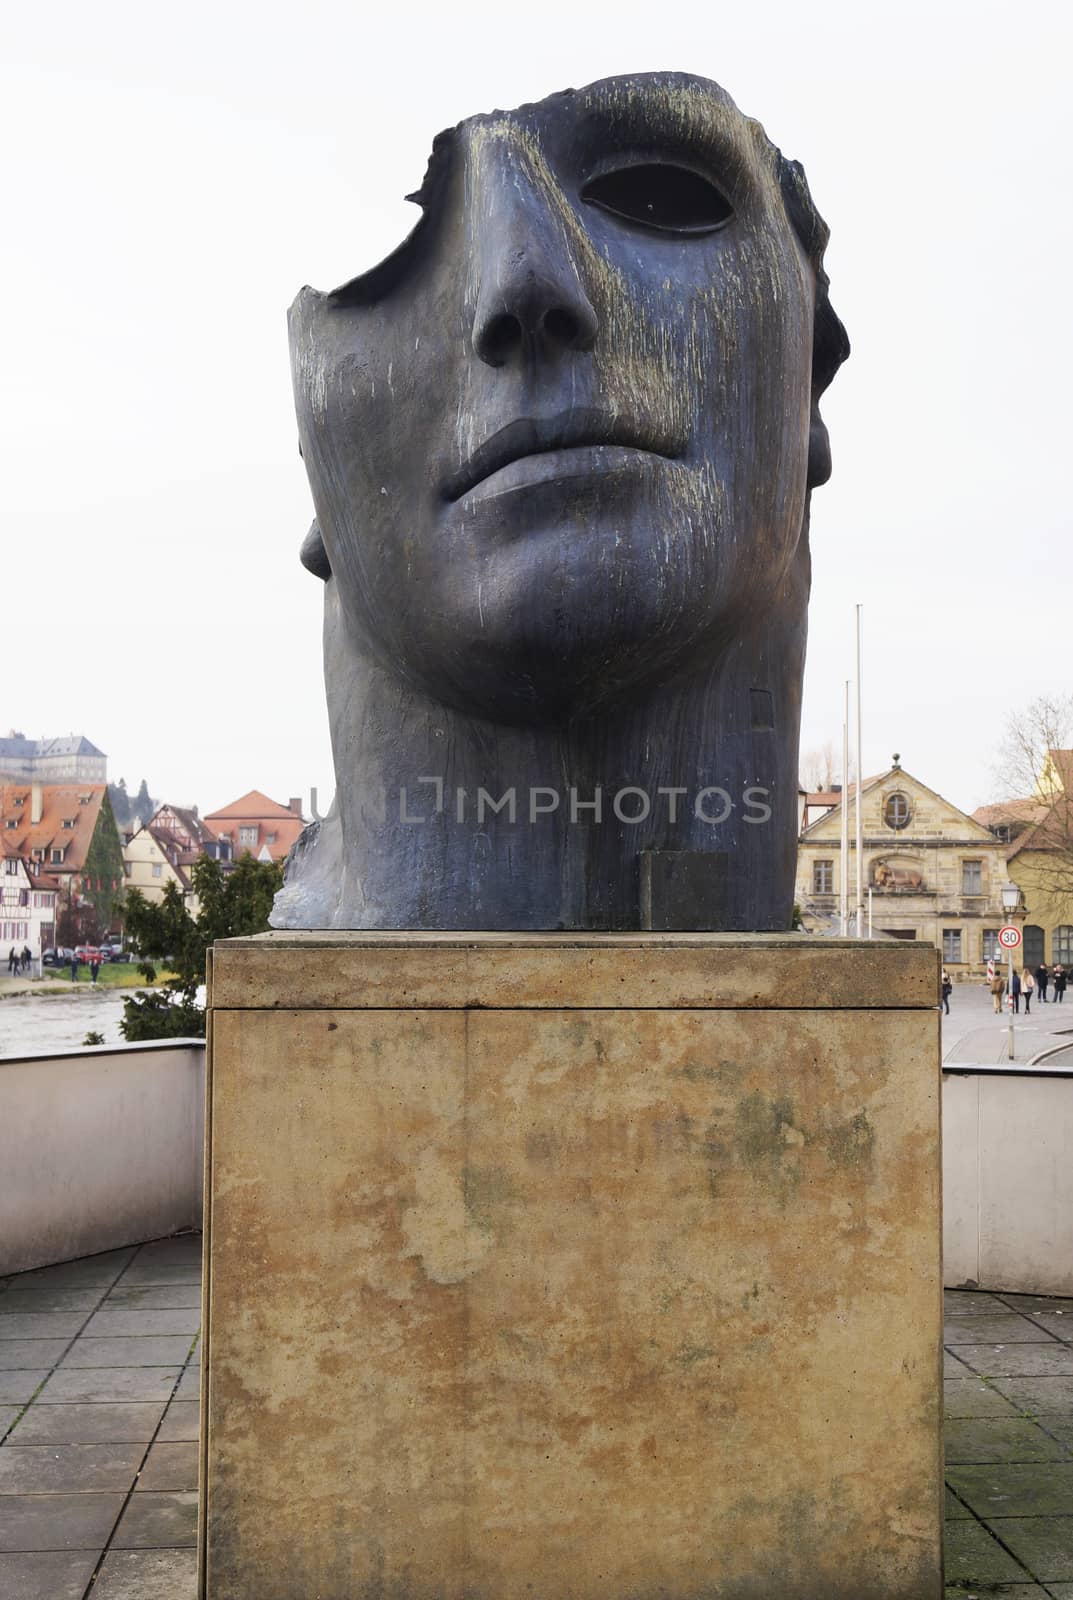 Centurione I statue in Bamberg, Germany by magraphics